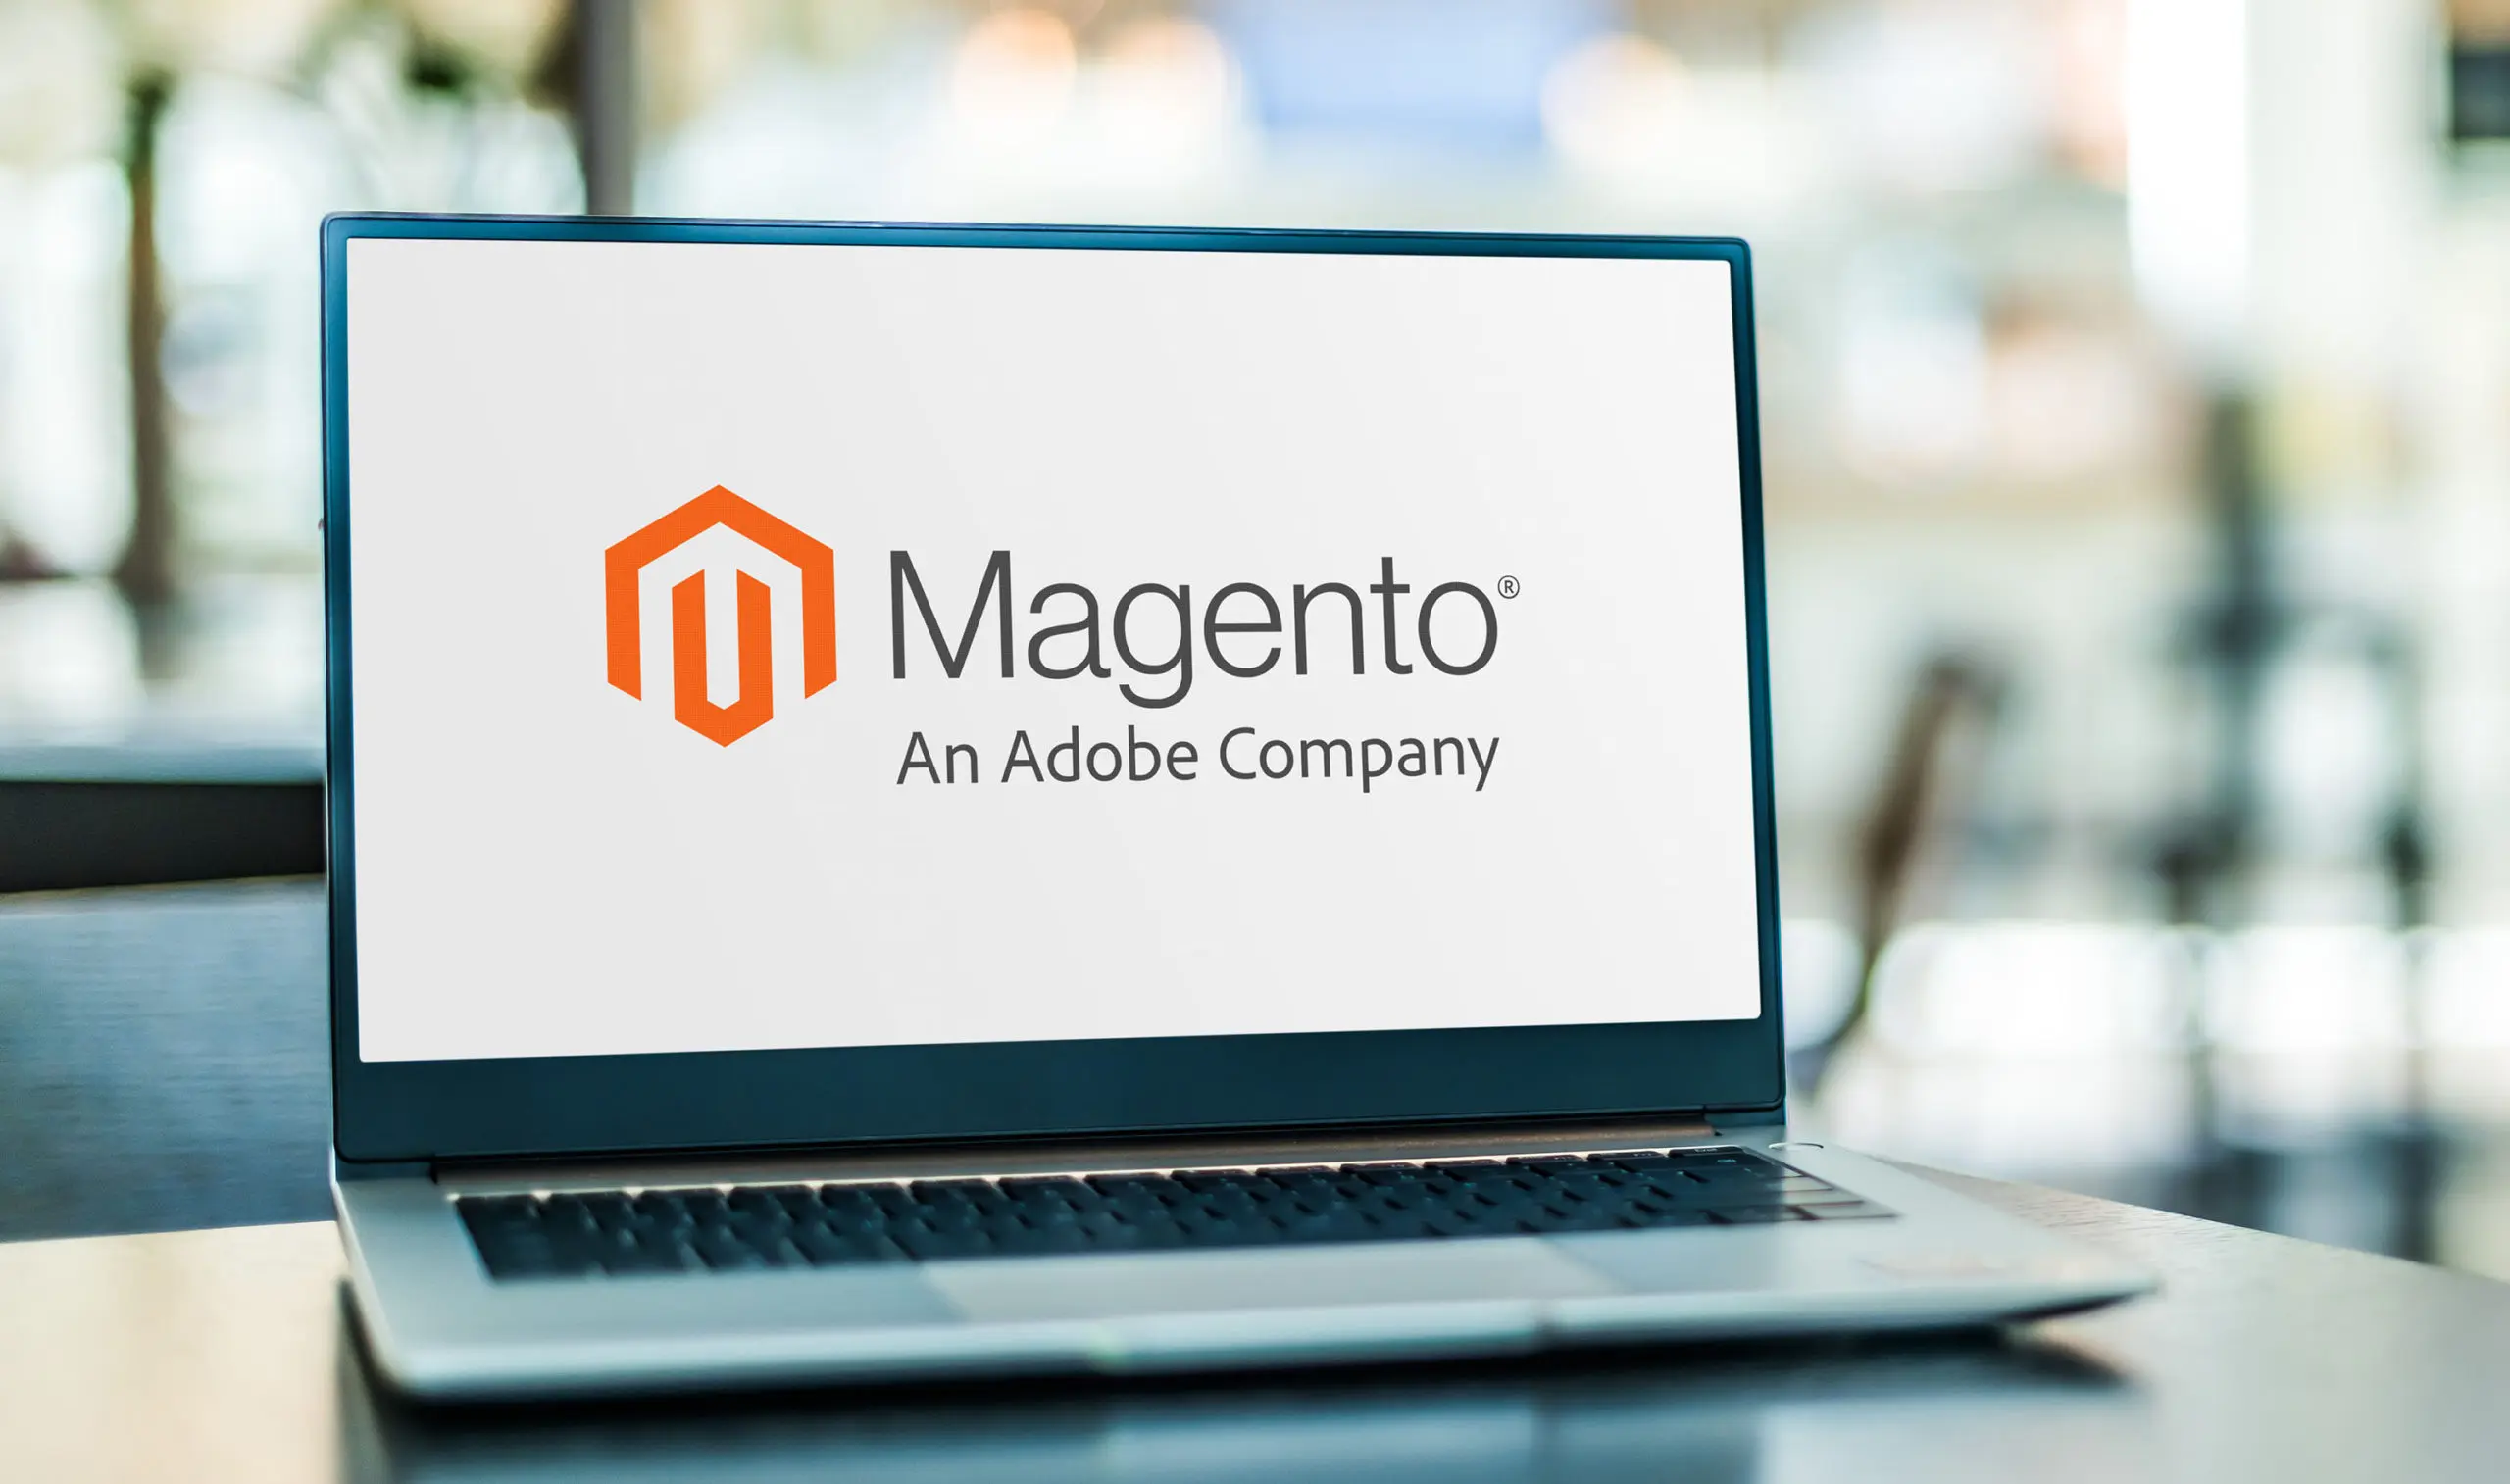 magento on computer cropped (from ImageEngine)